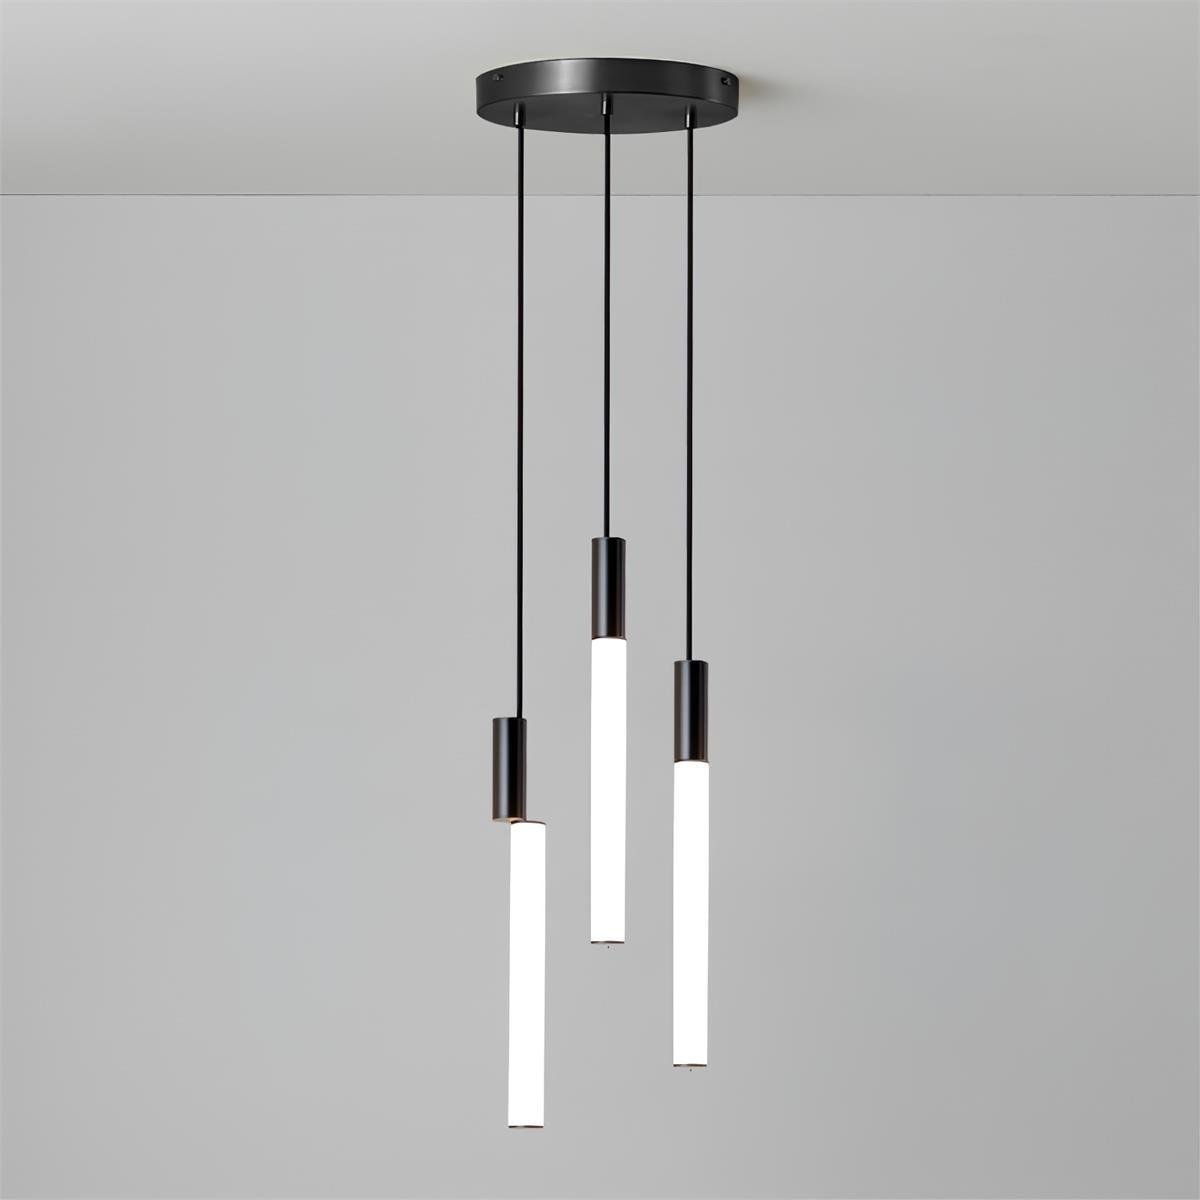 LED Pendant Light with 3 Signal Heads, measuring 7.9 inches in diameter and 59 inches in height (20cm x 150cm), available in Black and White colors, emitting Cool Light.